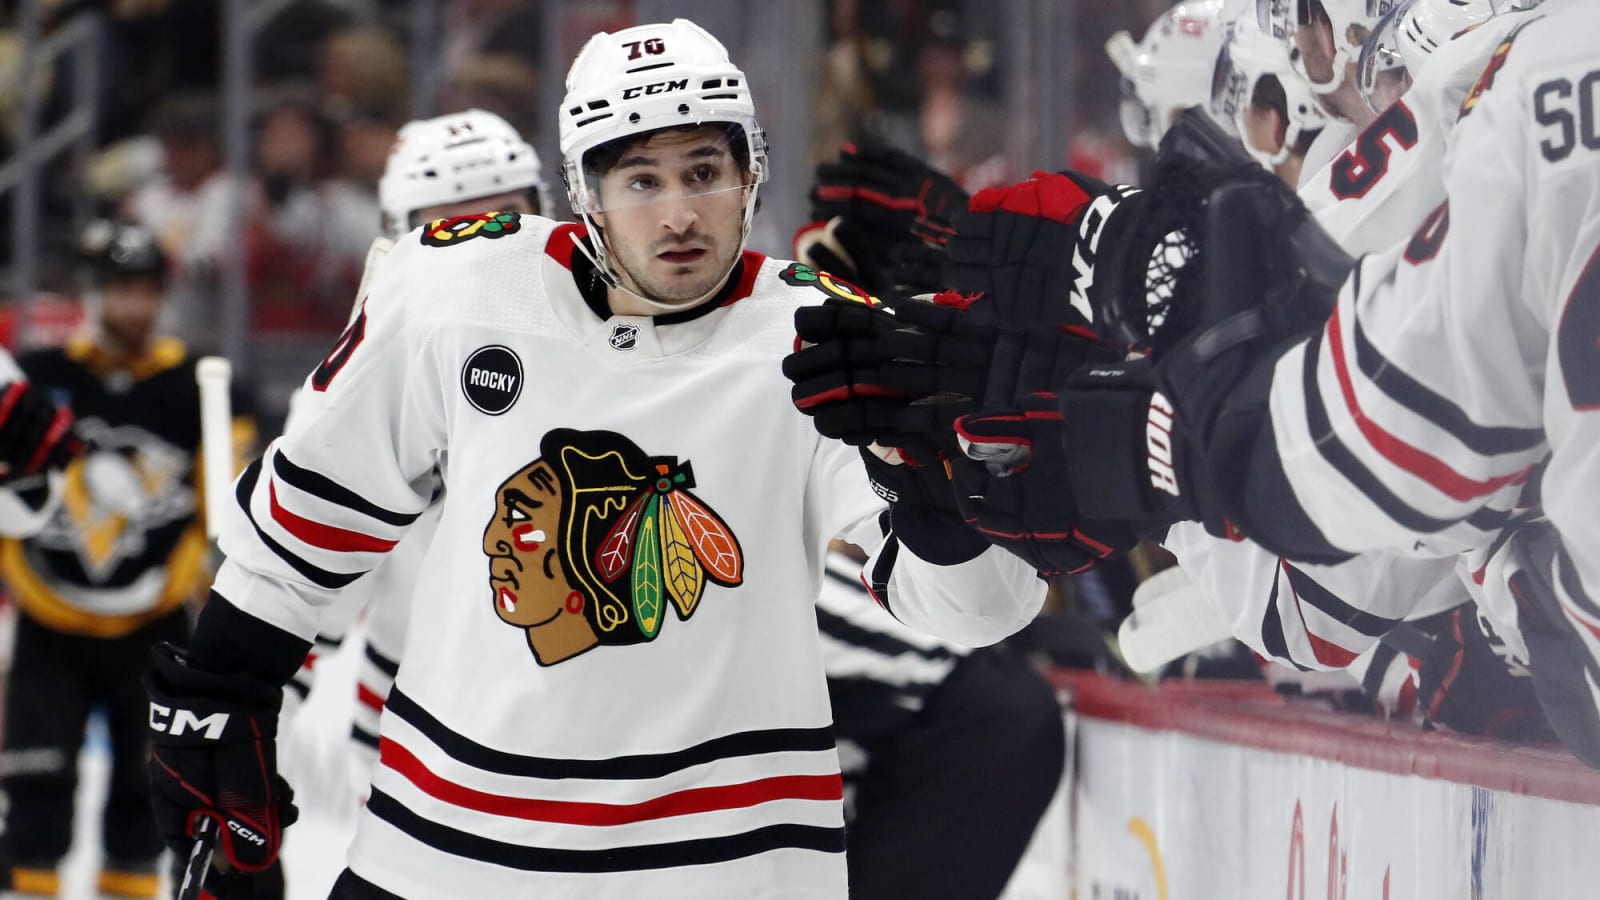 Chicago Blackhawks rally past Pittsburgh Penguins for 4-2 win on